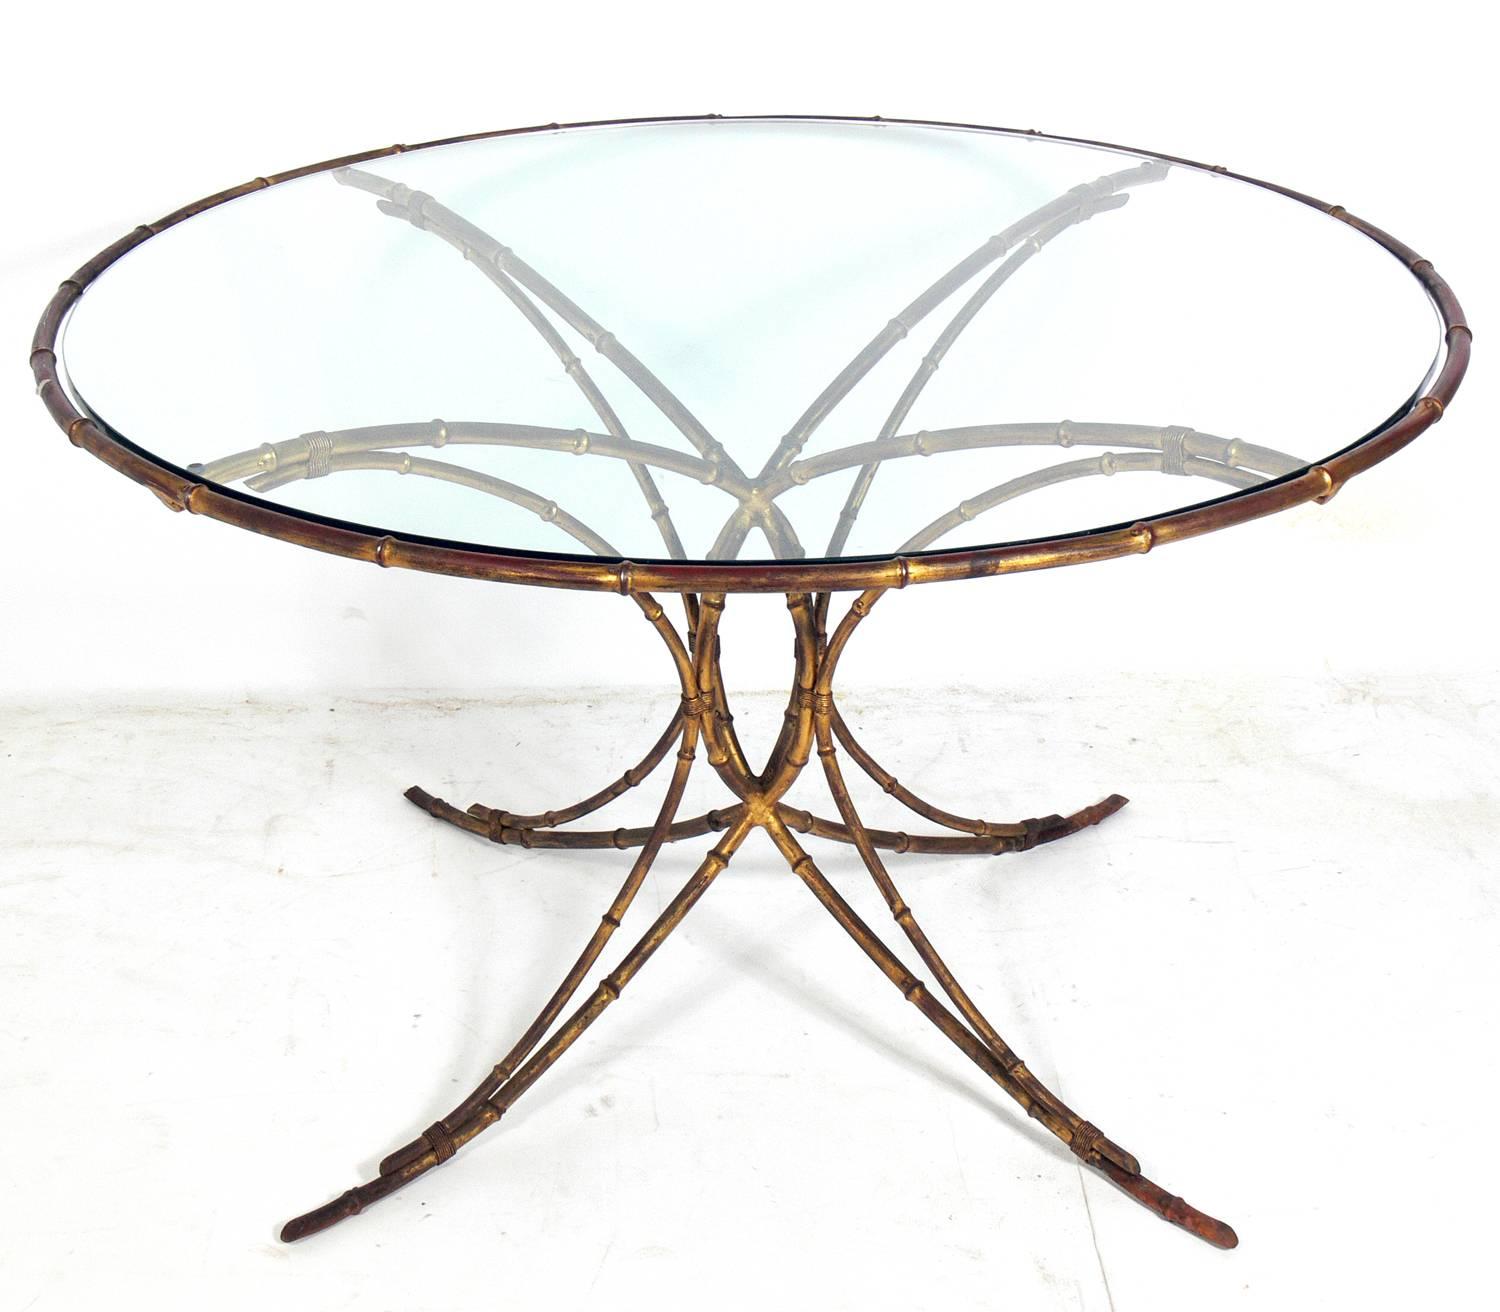 Elegant gilt metal faux bamboo dining set, probably Italian, circa 1950s. The set consists of the dining table, two armchairs and two side chairs. The dining table measures: 28.5